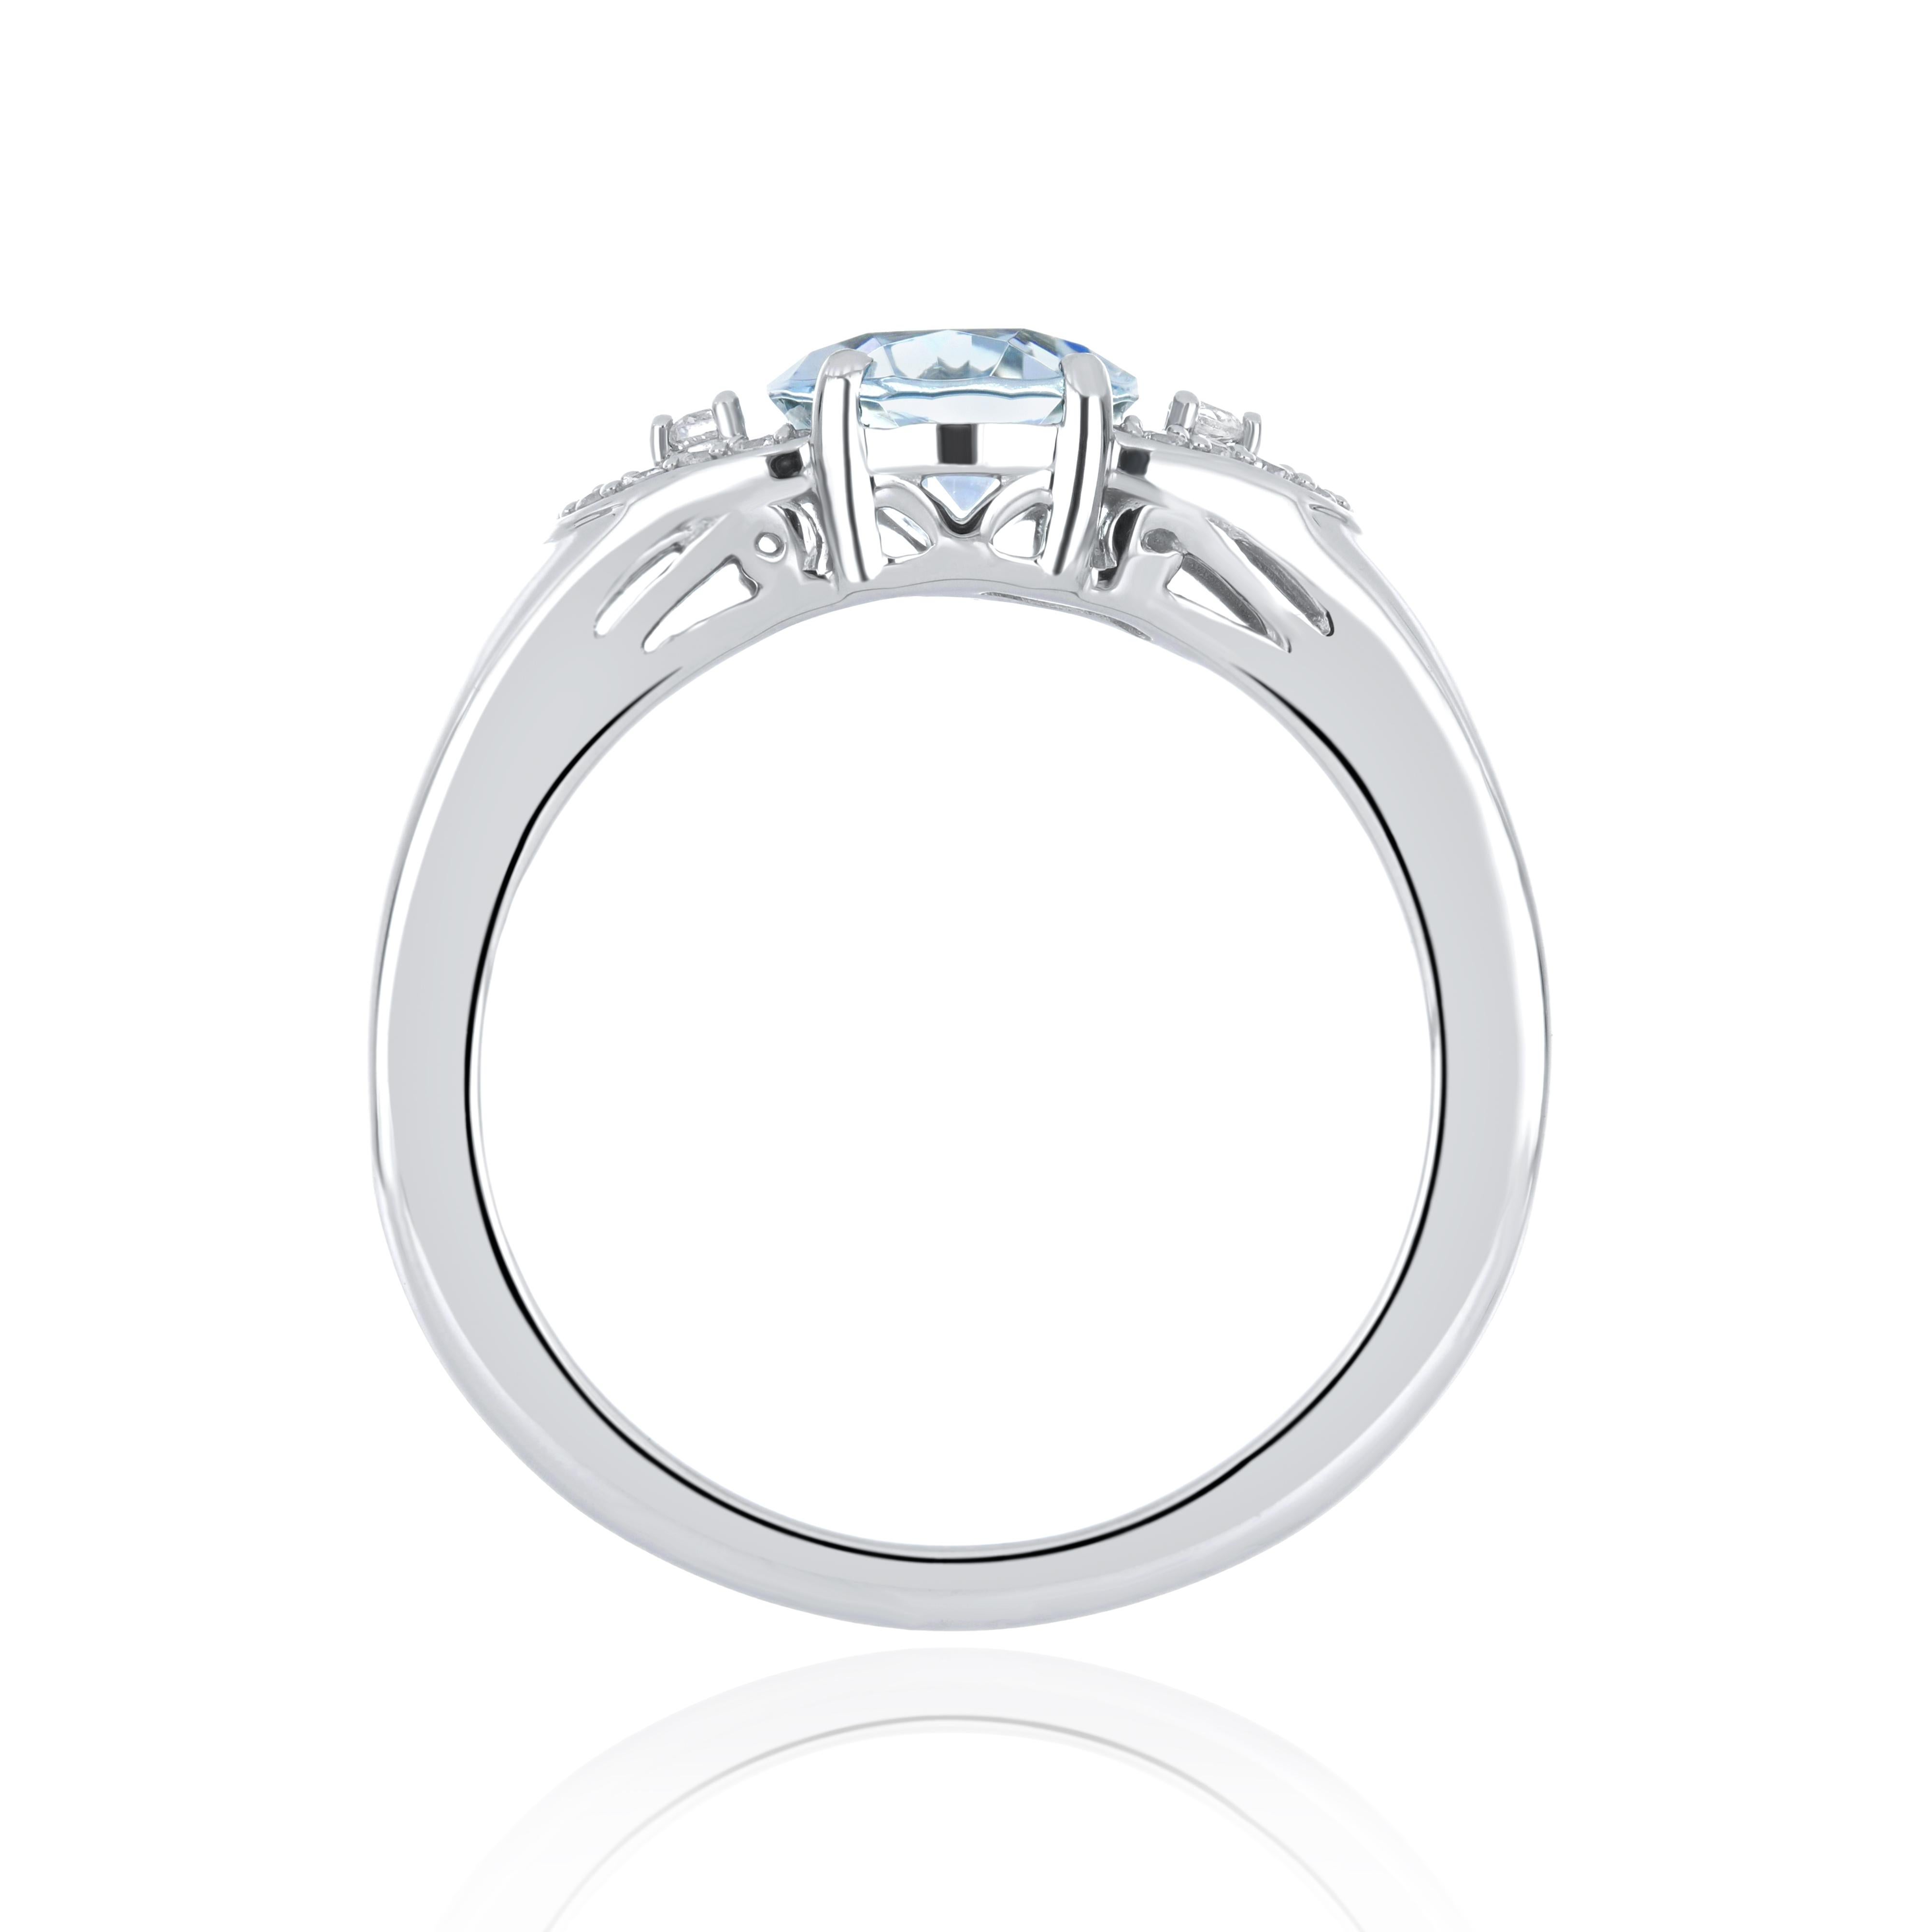 Elegant and exquisitely detailed 14 Karat White Gold Ring, center set with Aquamarine Oval 1.57Cts. White Zircon Ring Brilliant Round 0.20Cts  Beautifully Hand crafted in 14 Karat White Gold.

Stone Detail:
Aquamarine Oval : 9X7 MM
Stone